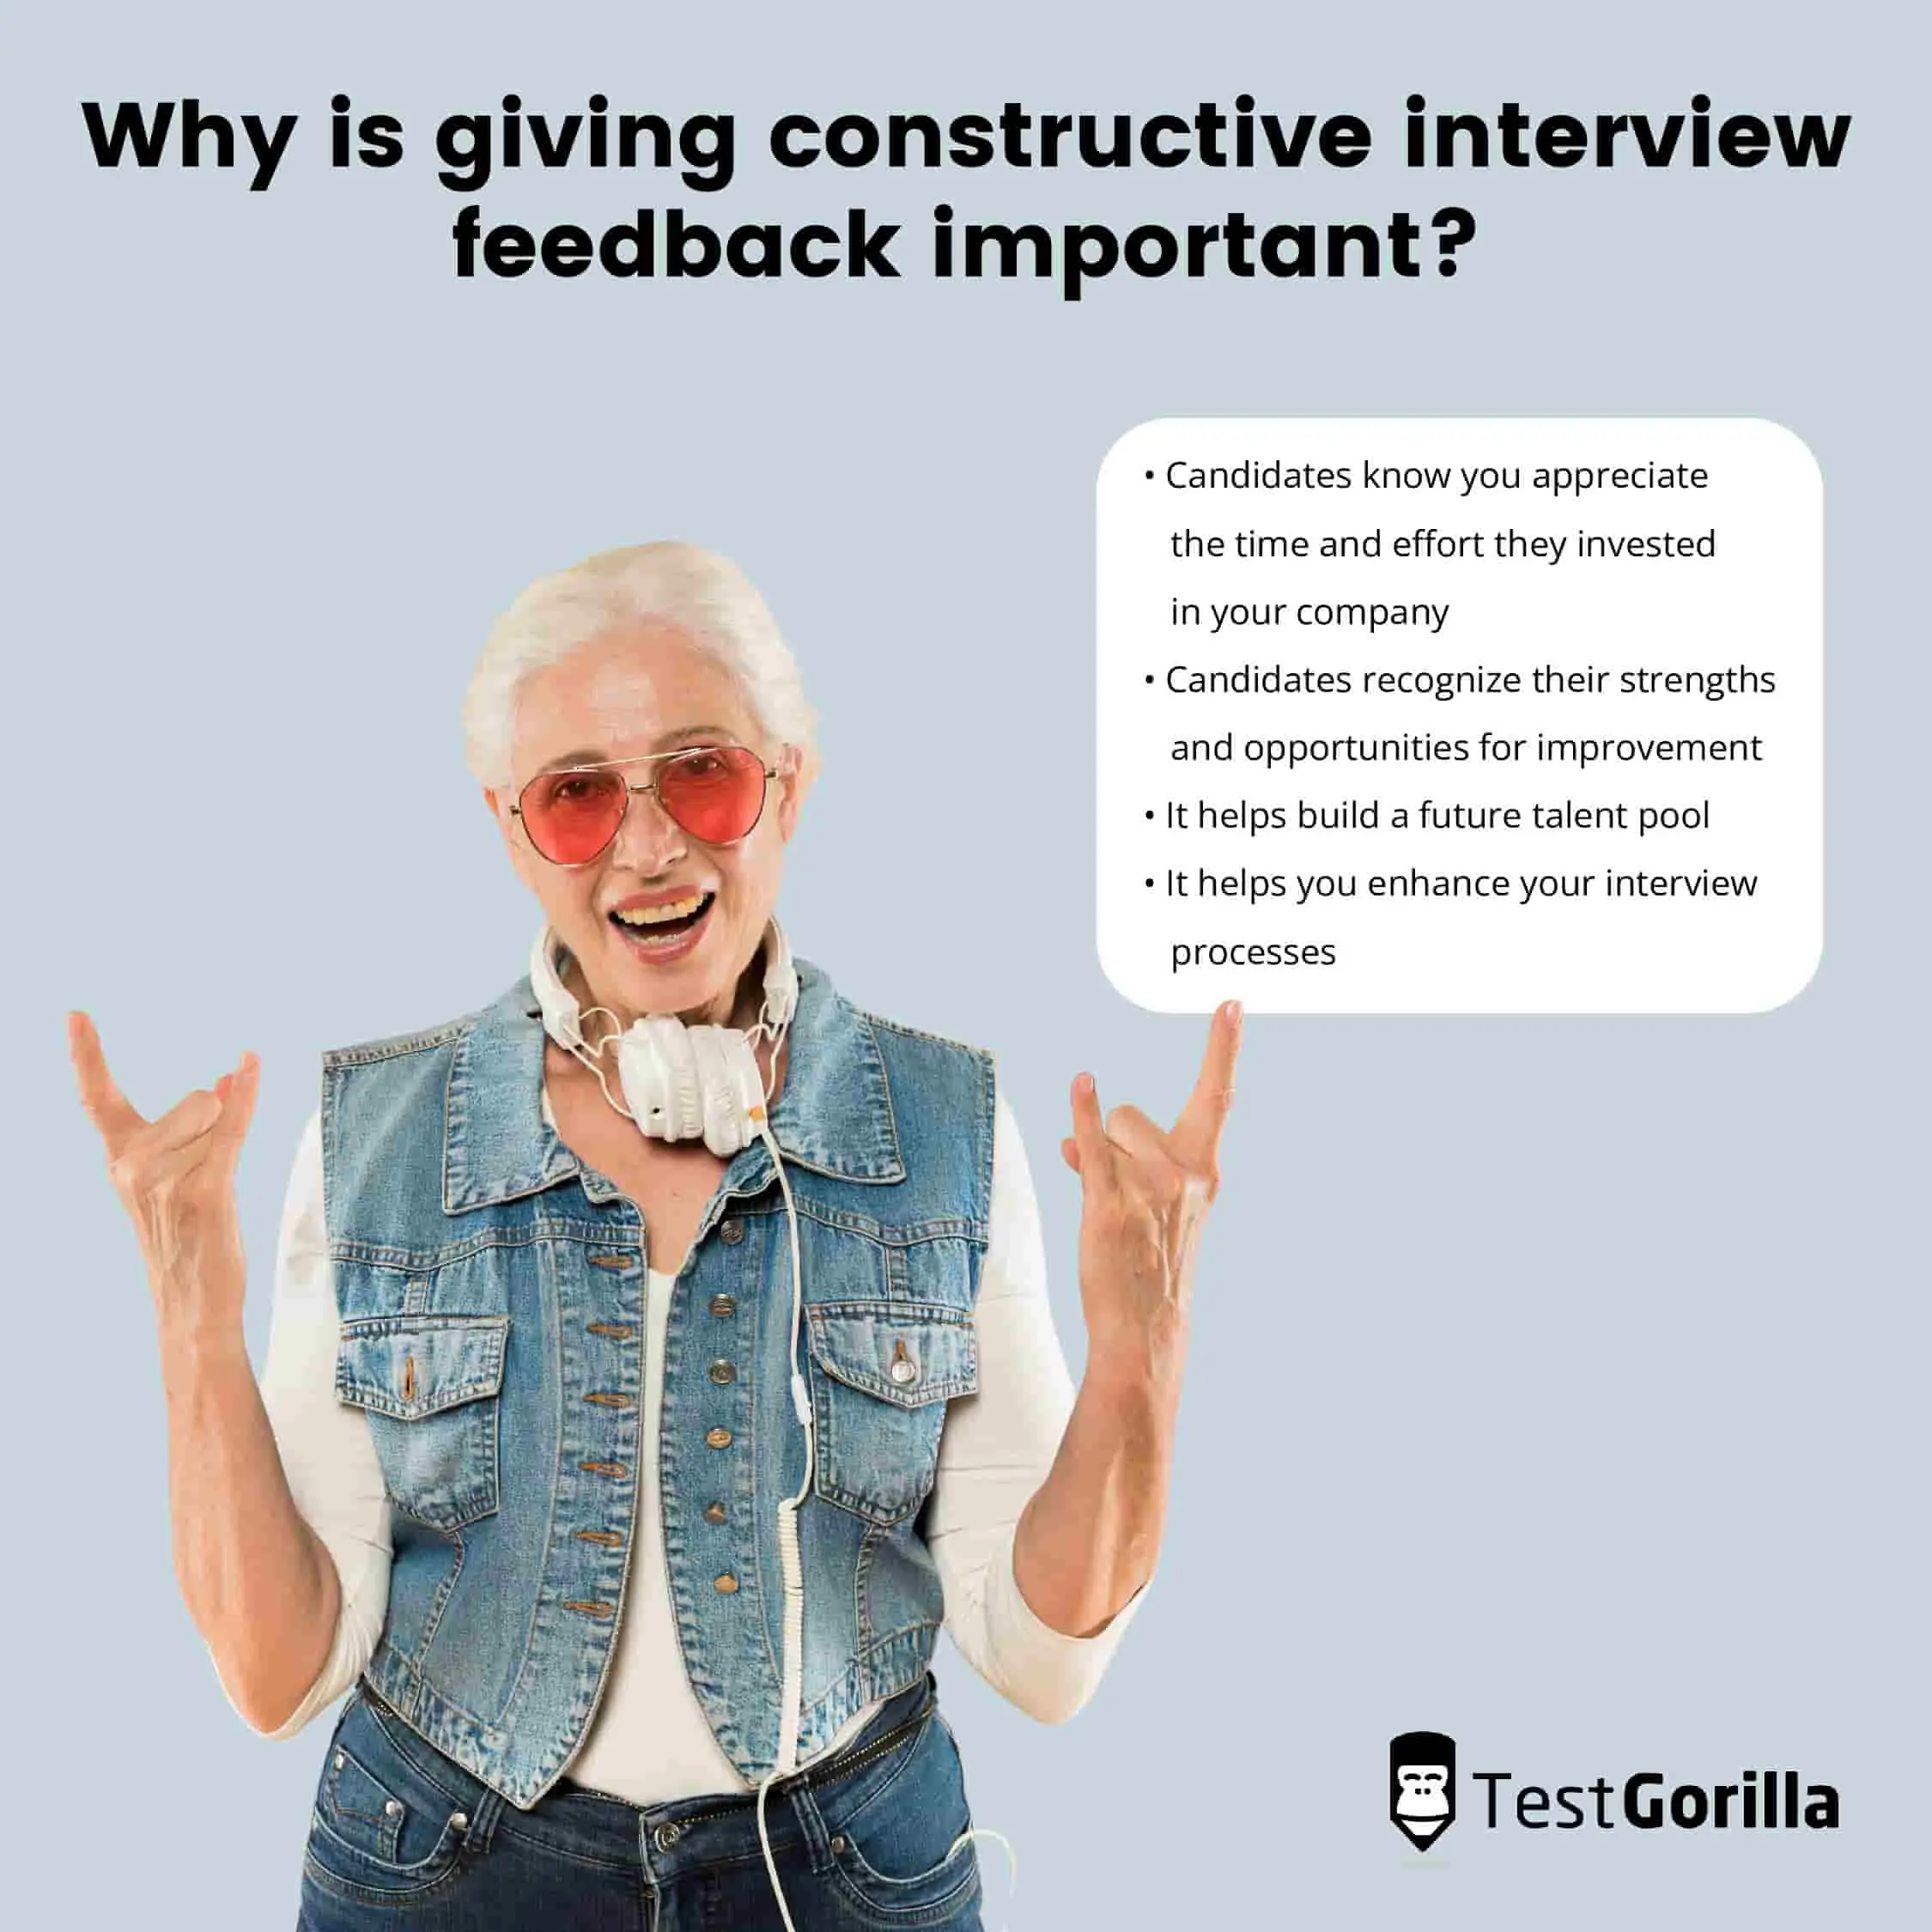 image showing the reasons why giving constructive interview feedback is important